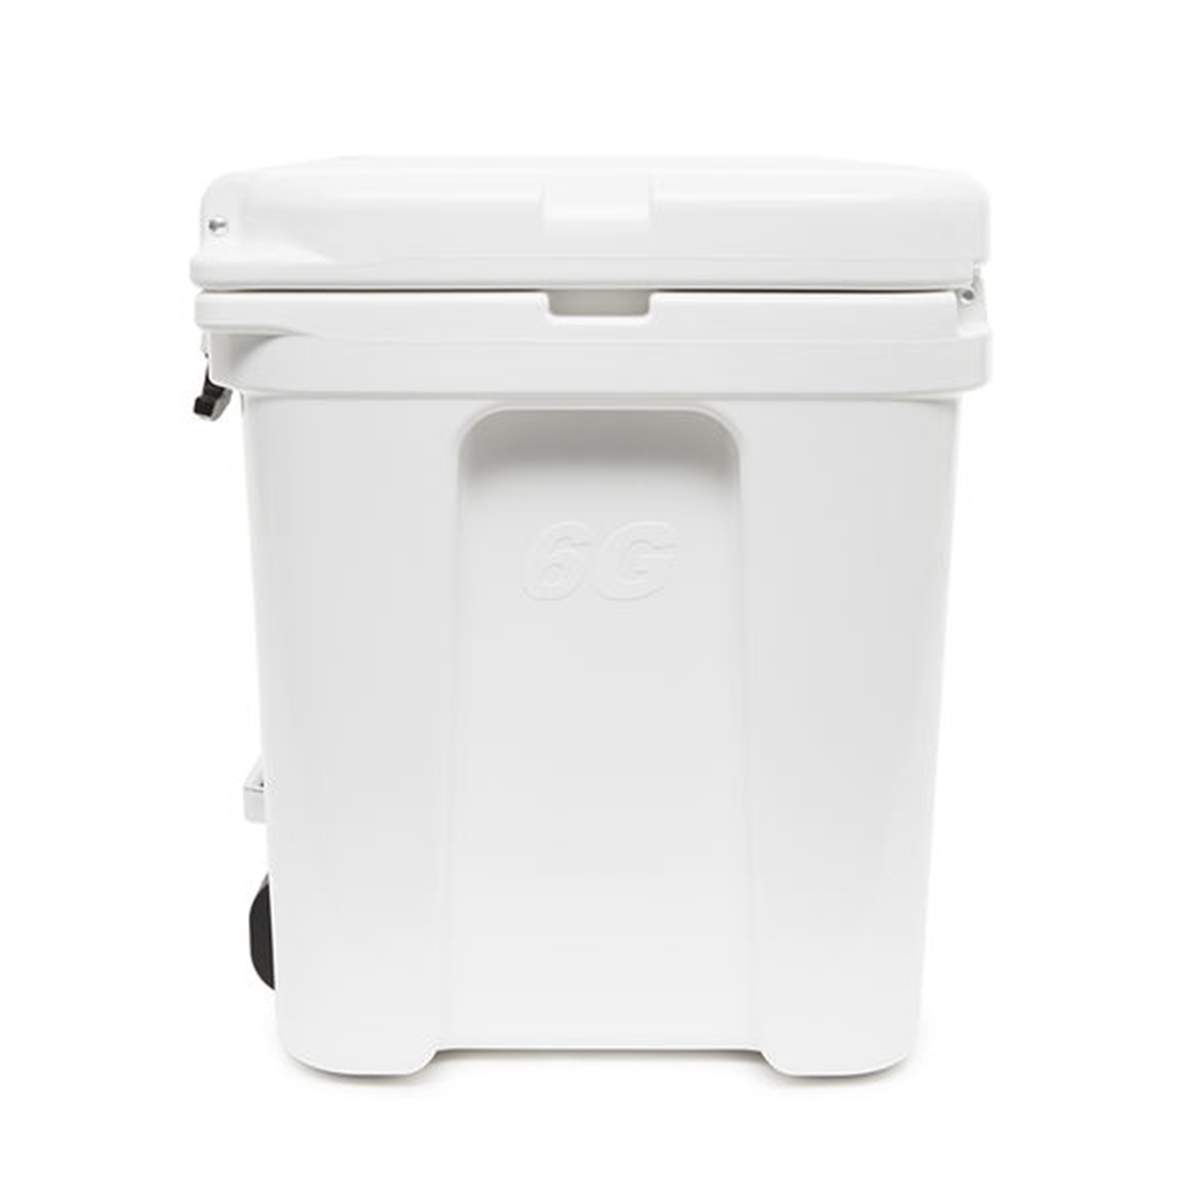 yeti silo water cooler referral